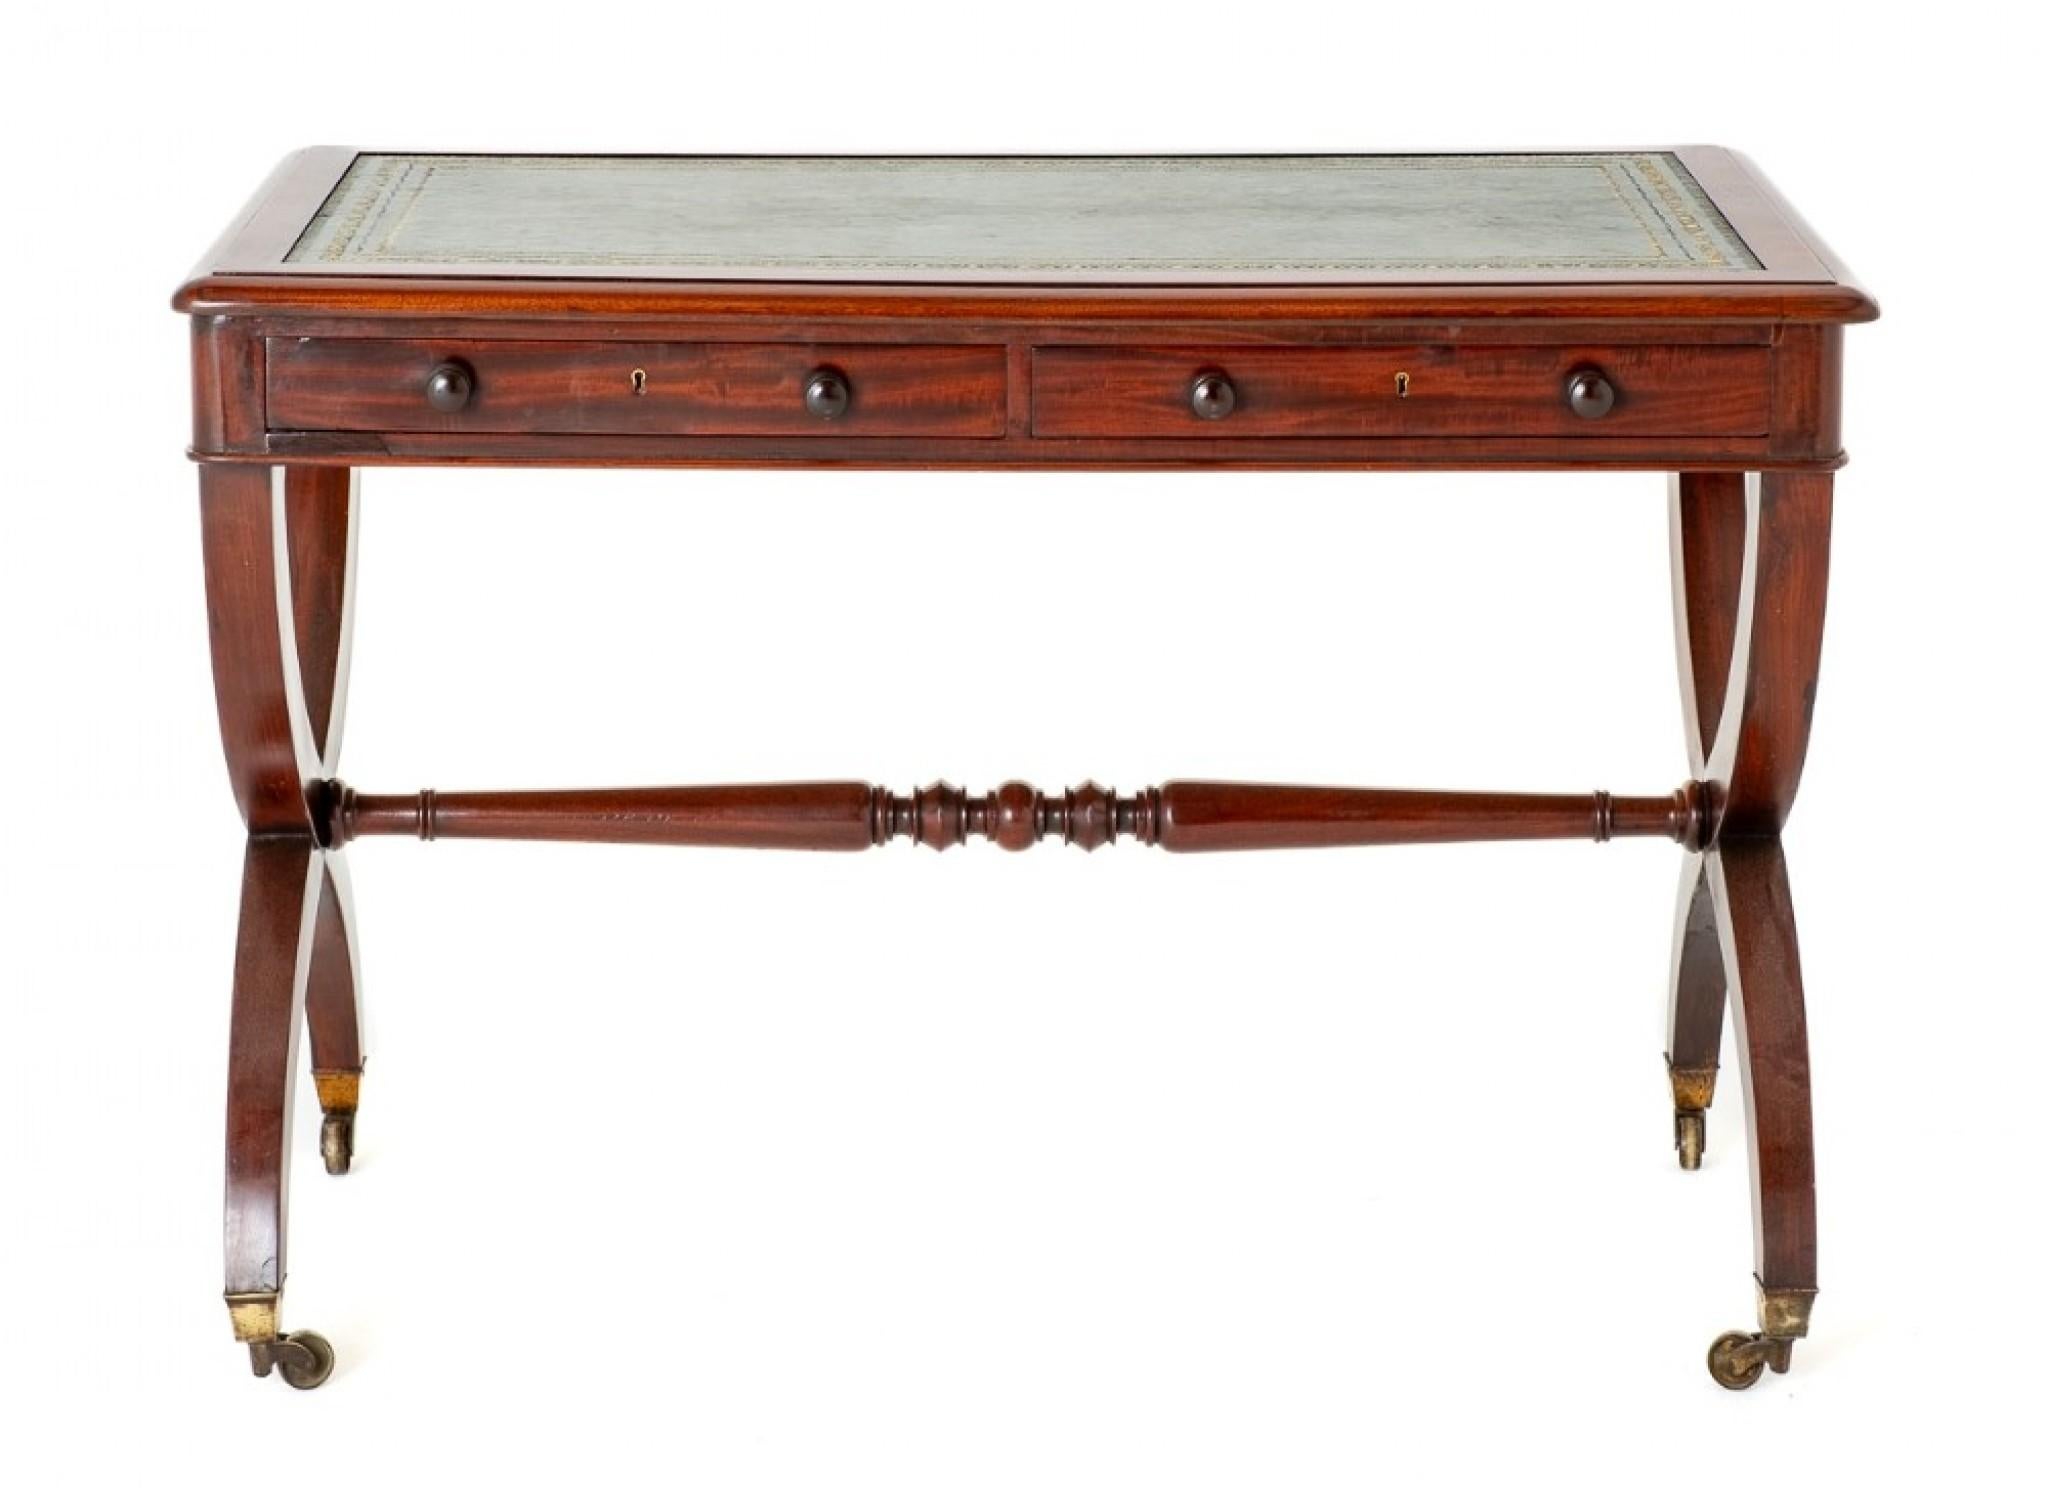 Regency Mahogany Writing Table.
This Quality Table is Raised upon Cross Frame Supports with Original Box Brass castors.
The Writing Table Features a Turned Stretcher, 2 x Oak Lined Drawers with Turned Knobs.
The Top of the Table Having a Fitted